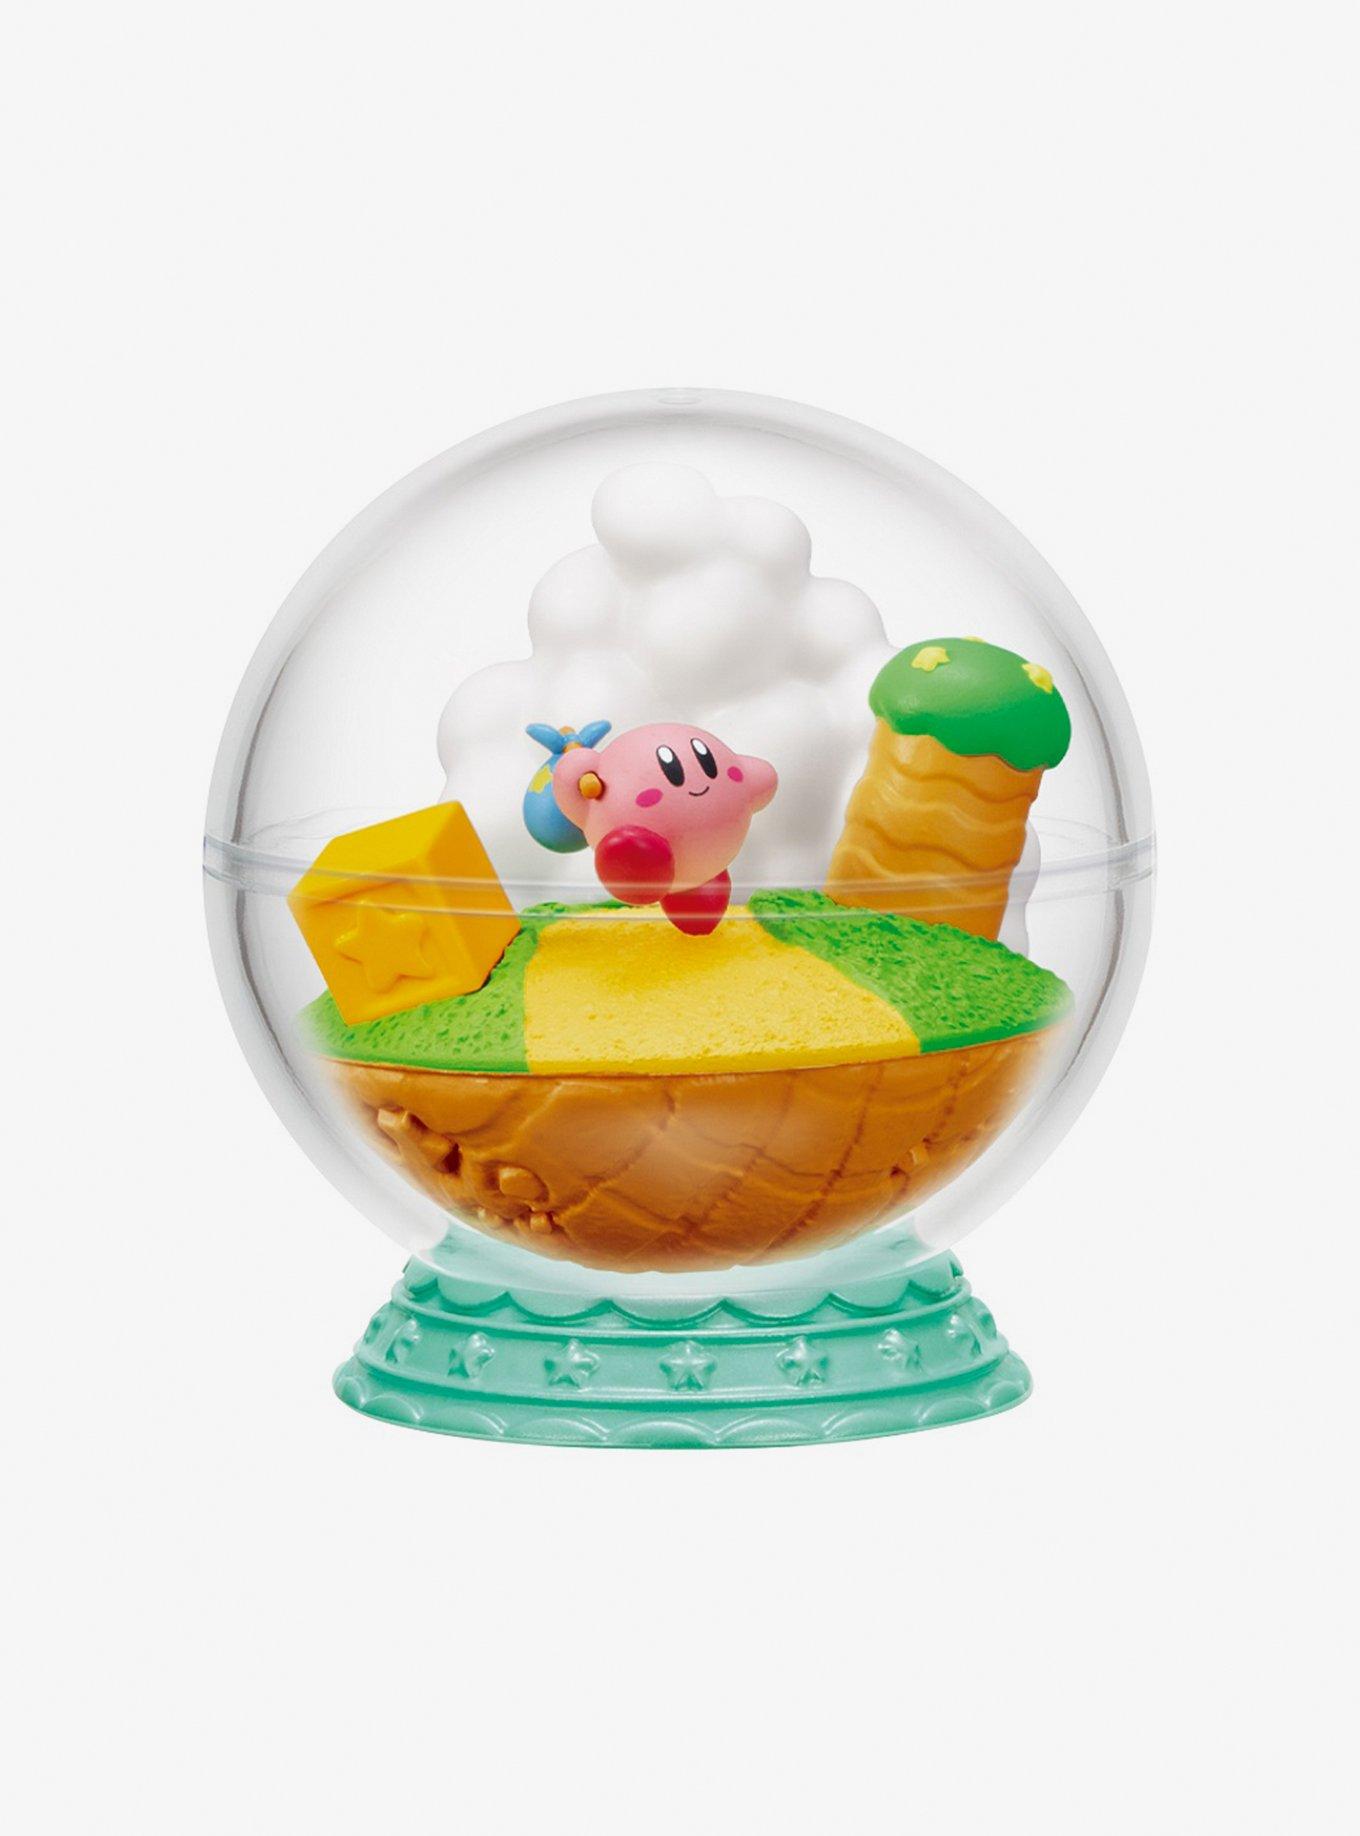  Kirby's Carbie Terrarium Collection Super DX Kirby's Dream Land  2 2. Kirby's Friends : Home & Kitchen